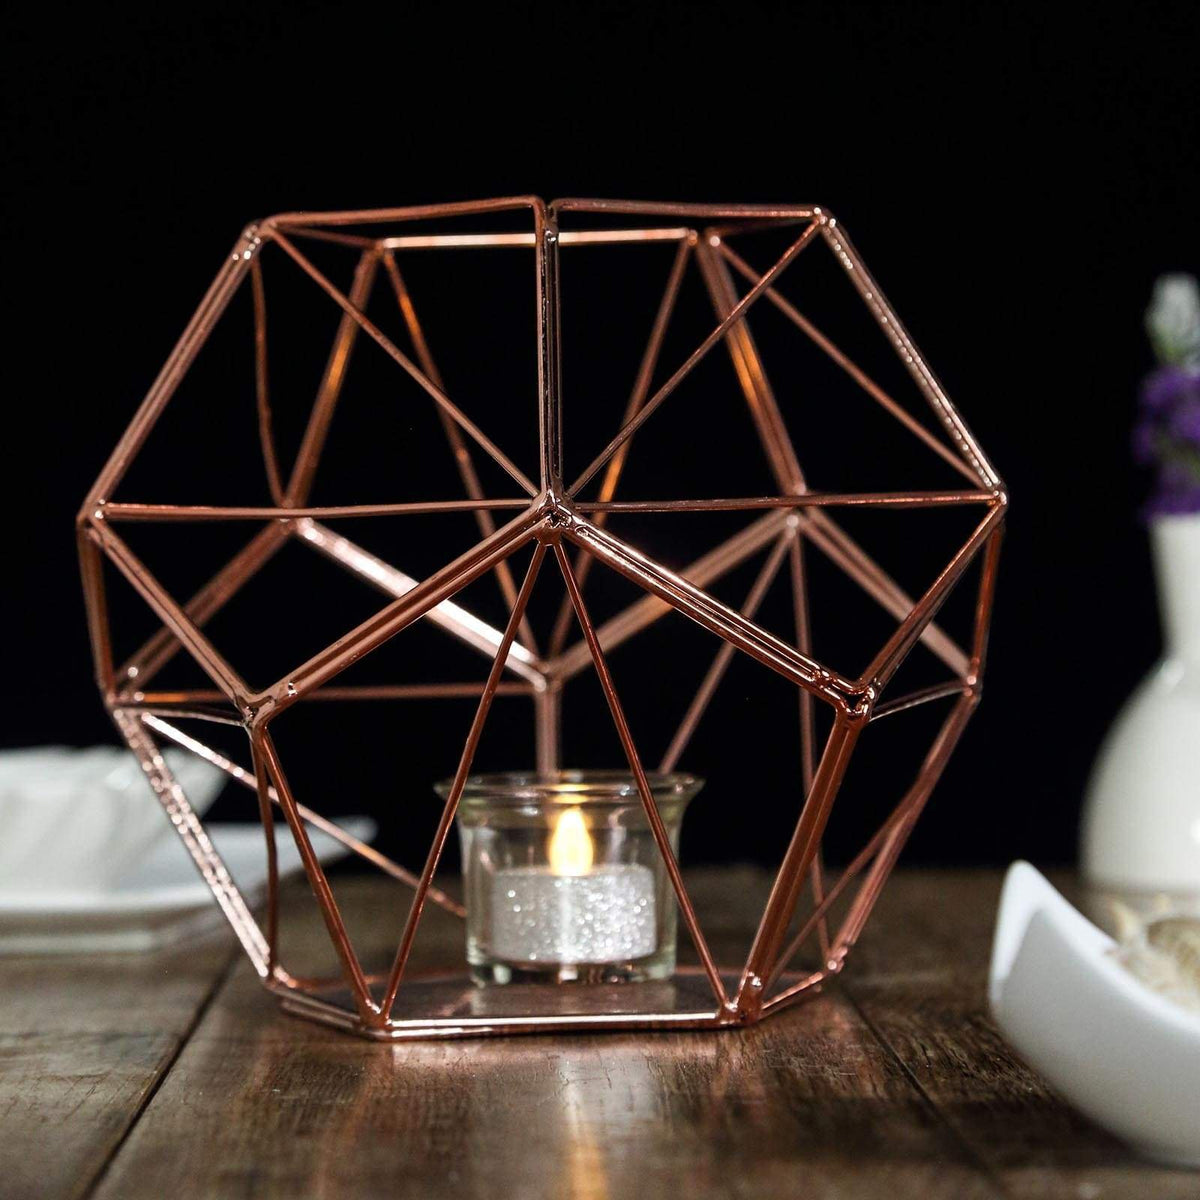 7 in tall Rose Gold Geometric Candle Holder Centerpiece Vase